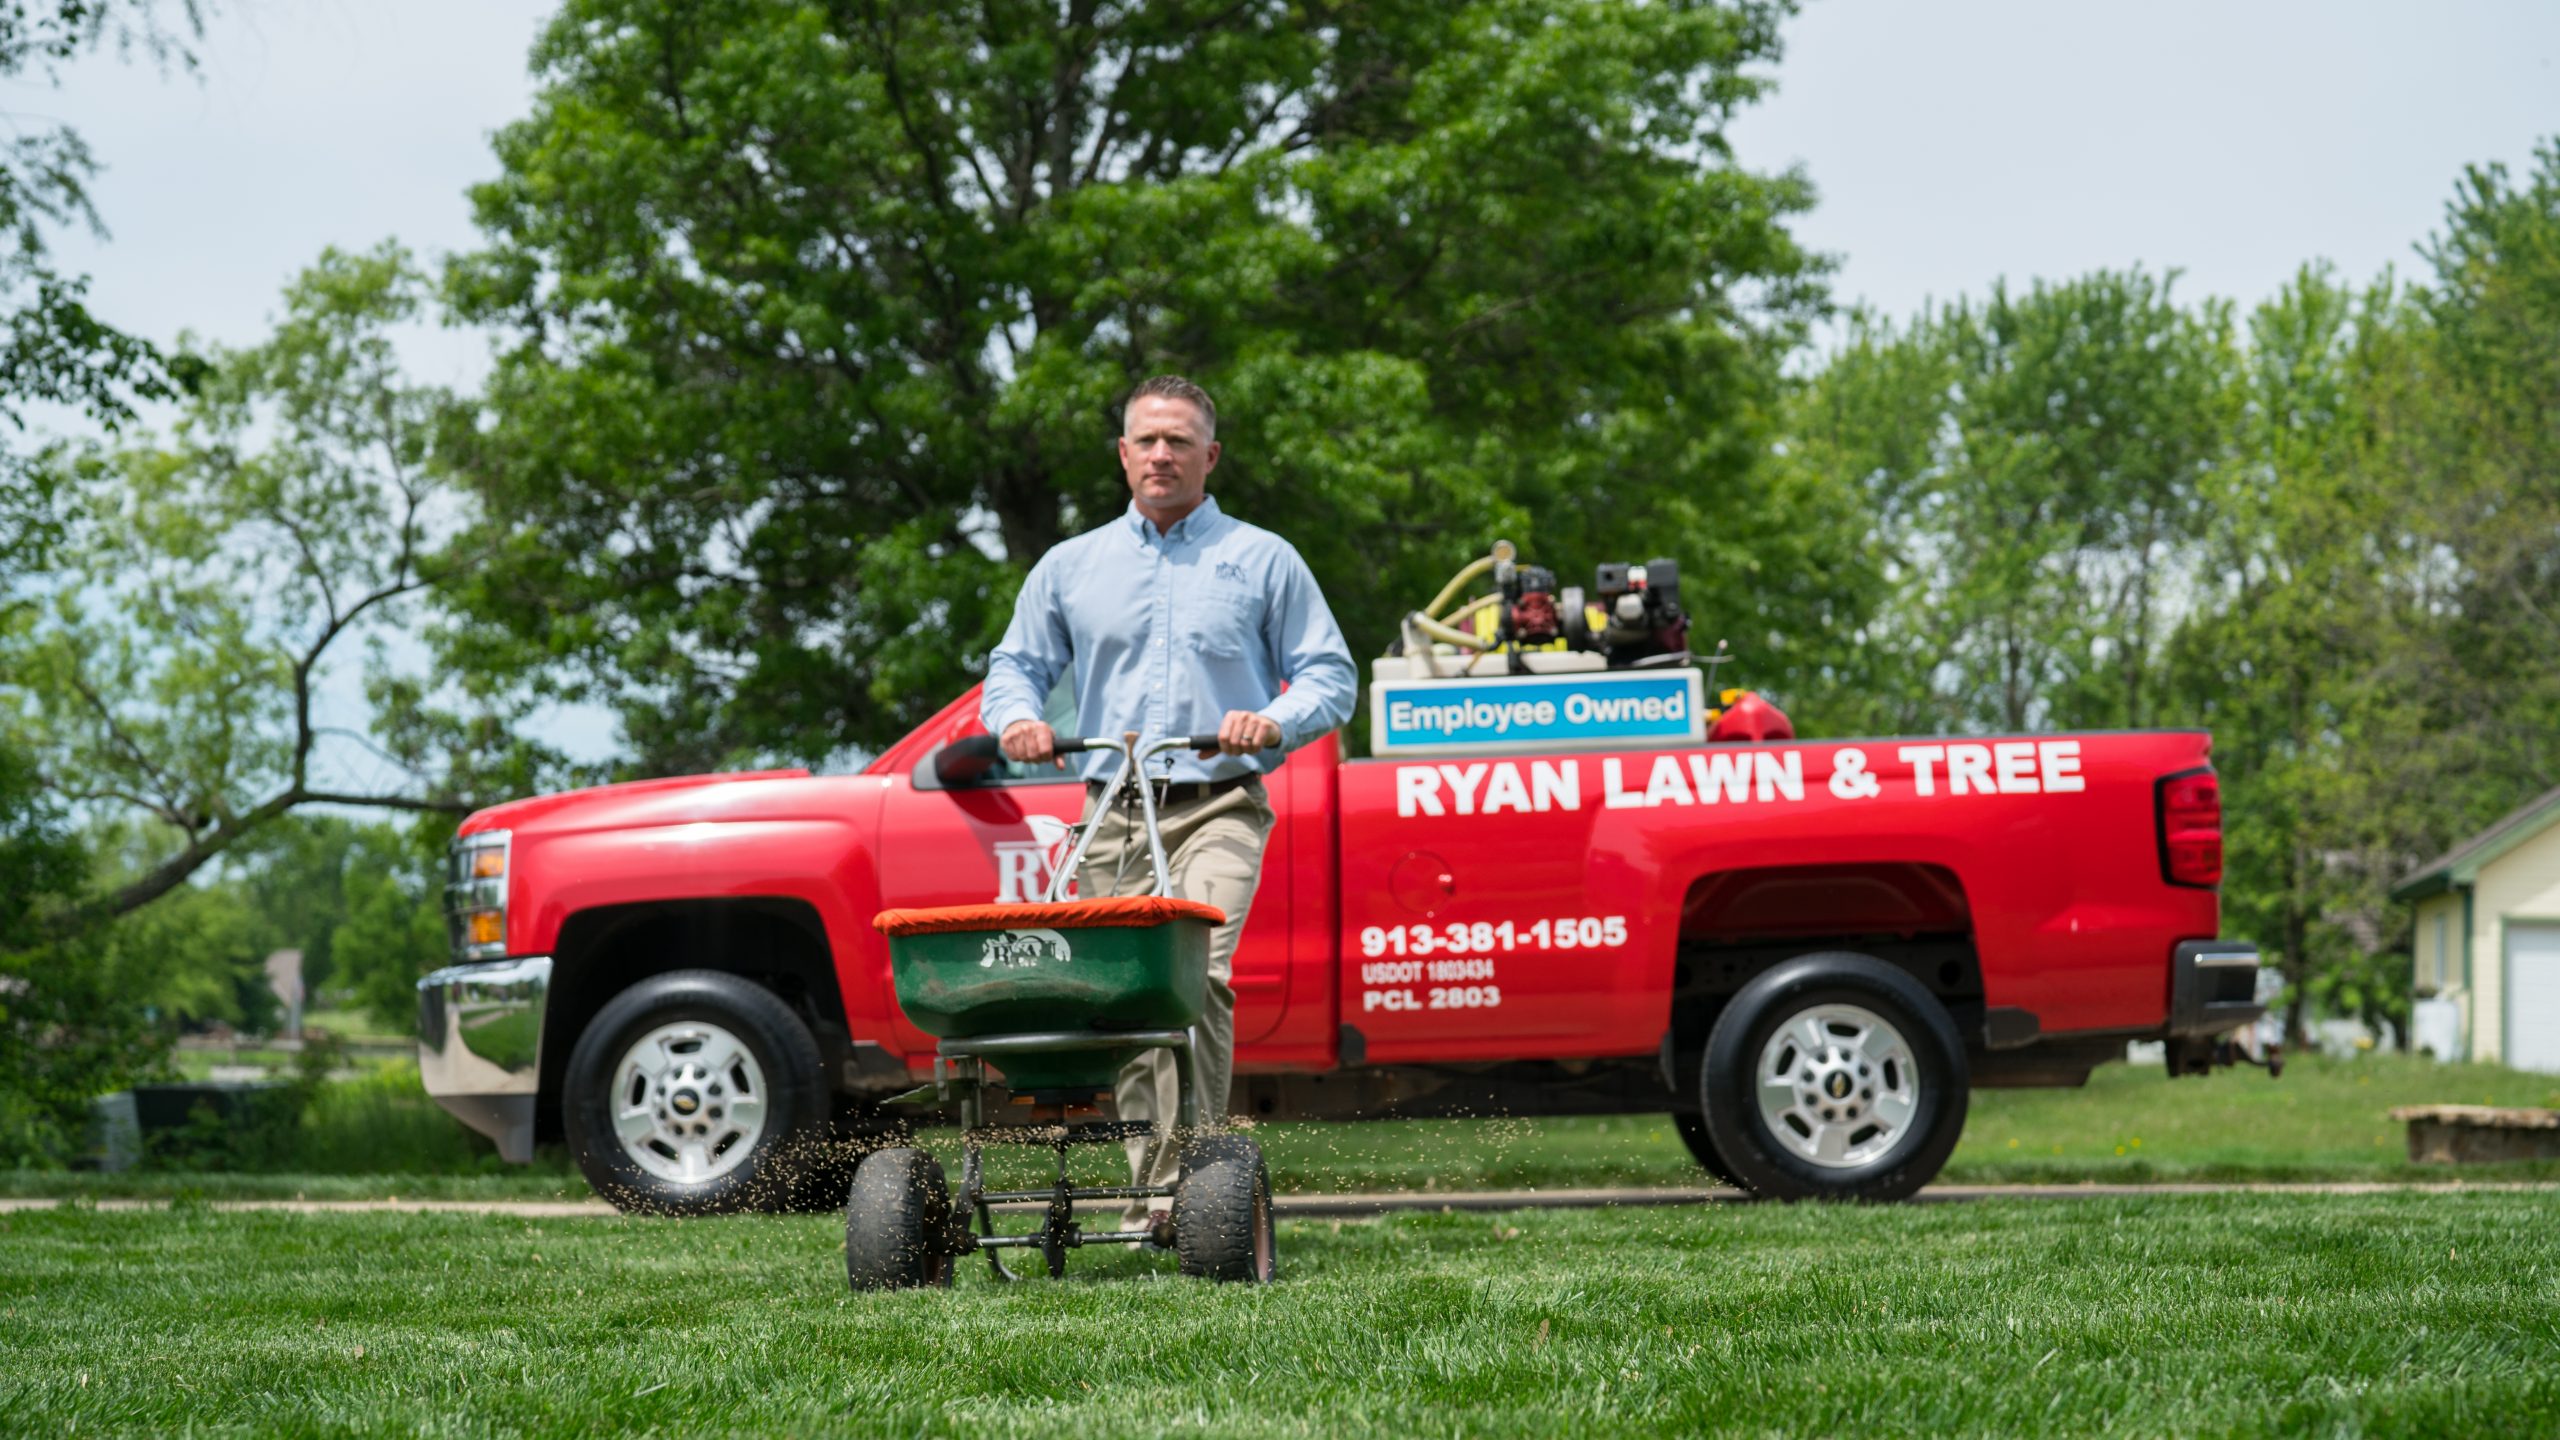 Best Lawn Care Service Near Me | Call The Pros At Ryan ...